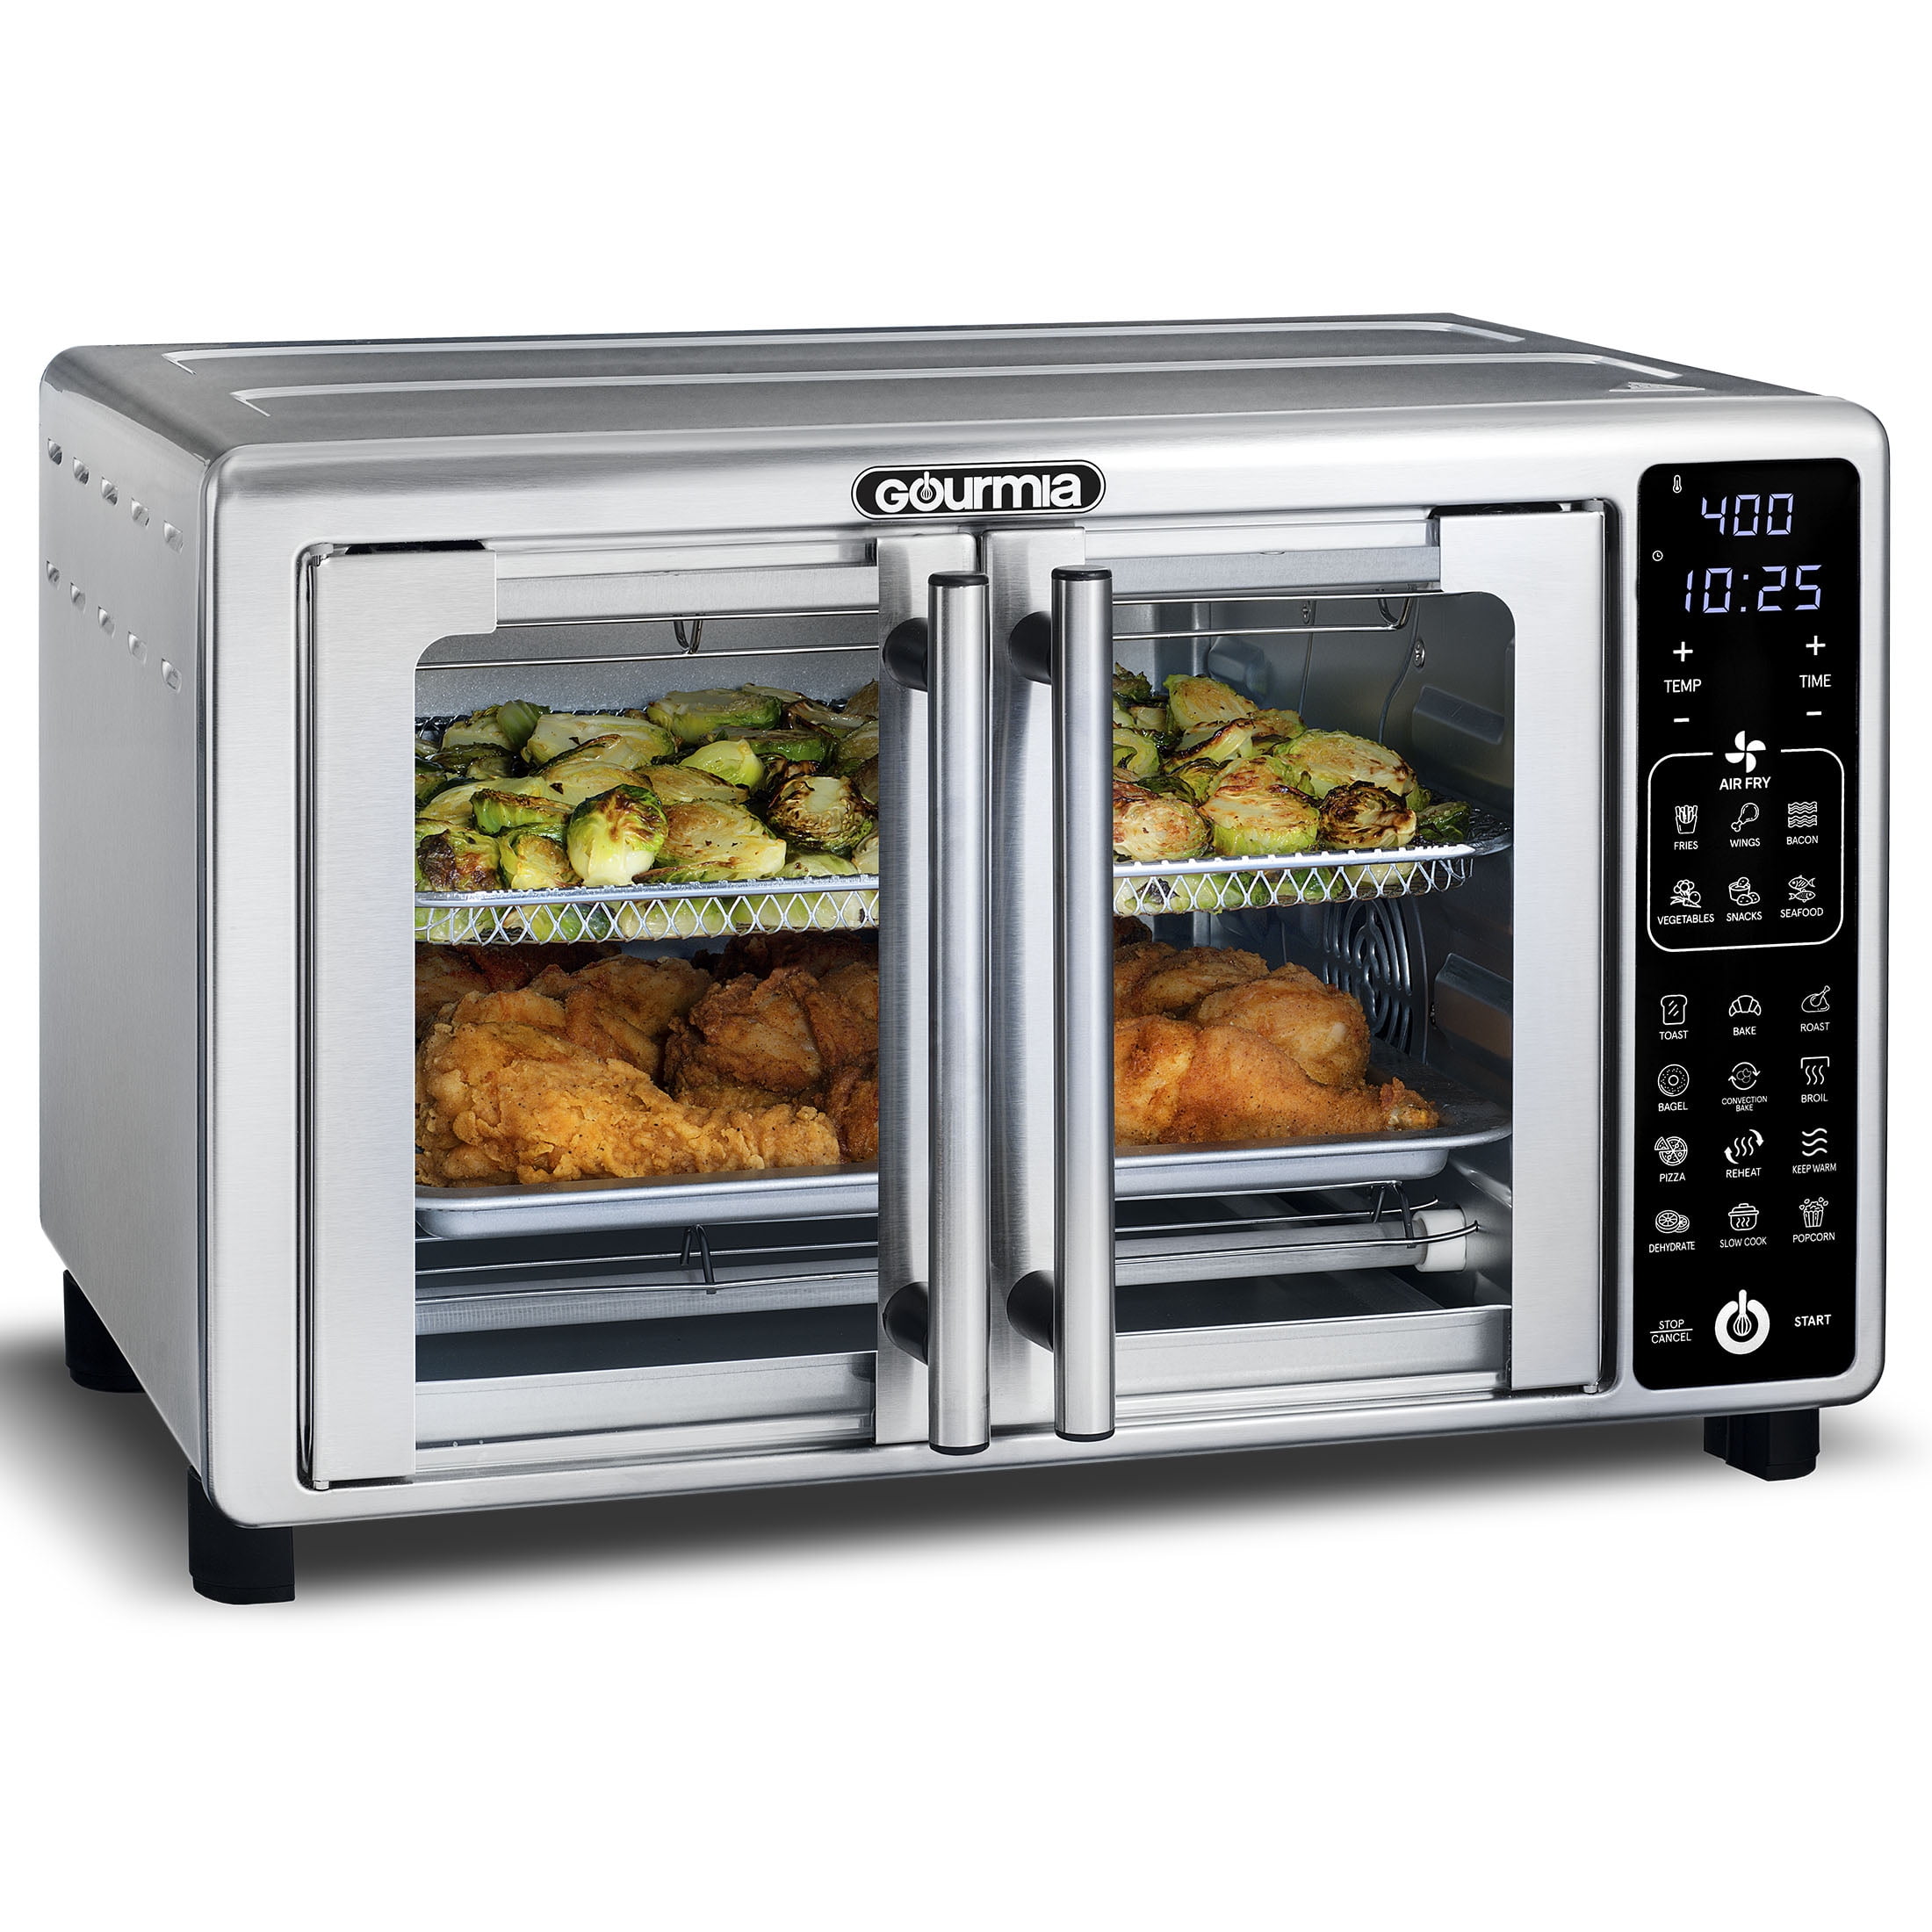 NEW Gourmia Digital Stainless Steel Toaster Oven Air Fryer - electronics -  by owner - sale - craigslist